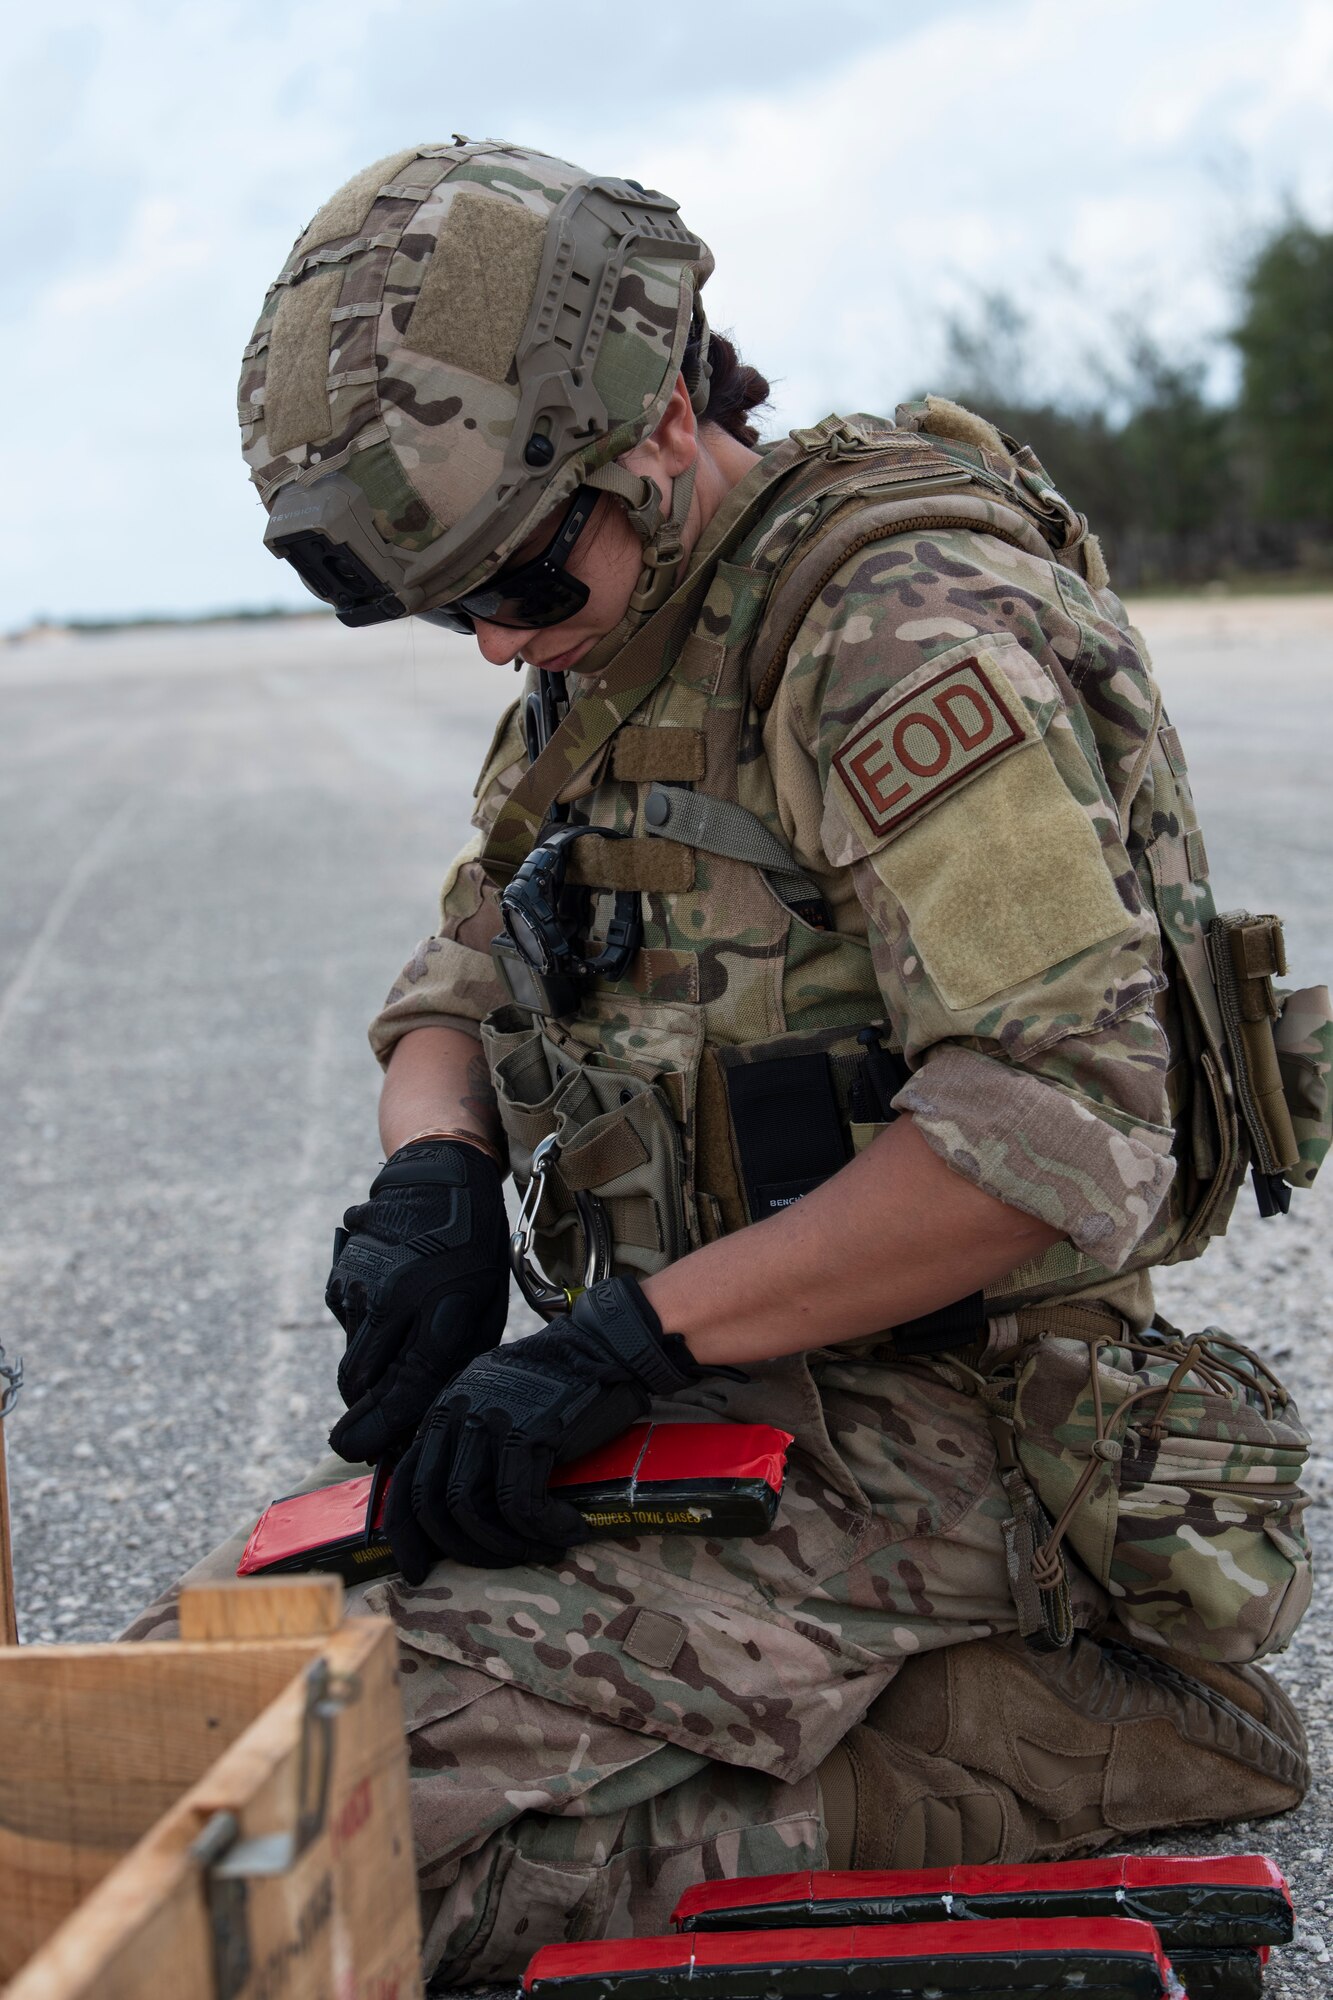 An Explosive Ordnance Disposal technician with the 36th Civil Engineer Squadron prepares her equipment during a Rapid Airfield Damage Repair (RADR) Exercise at Andersen Air Force Base, Feb. 12, 2020.